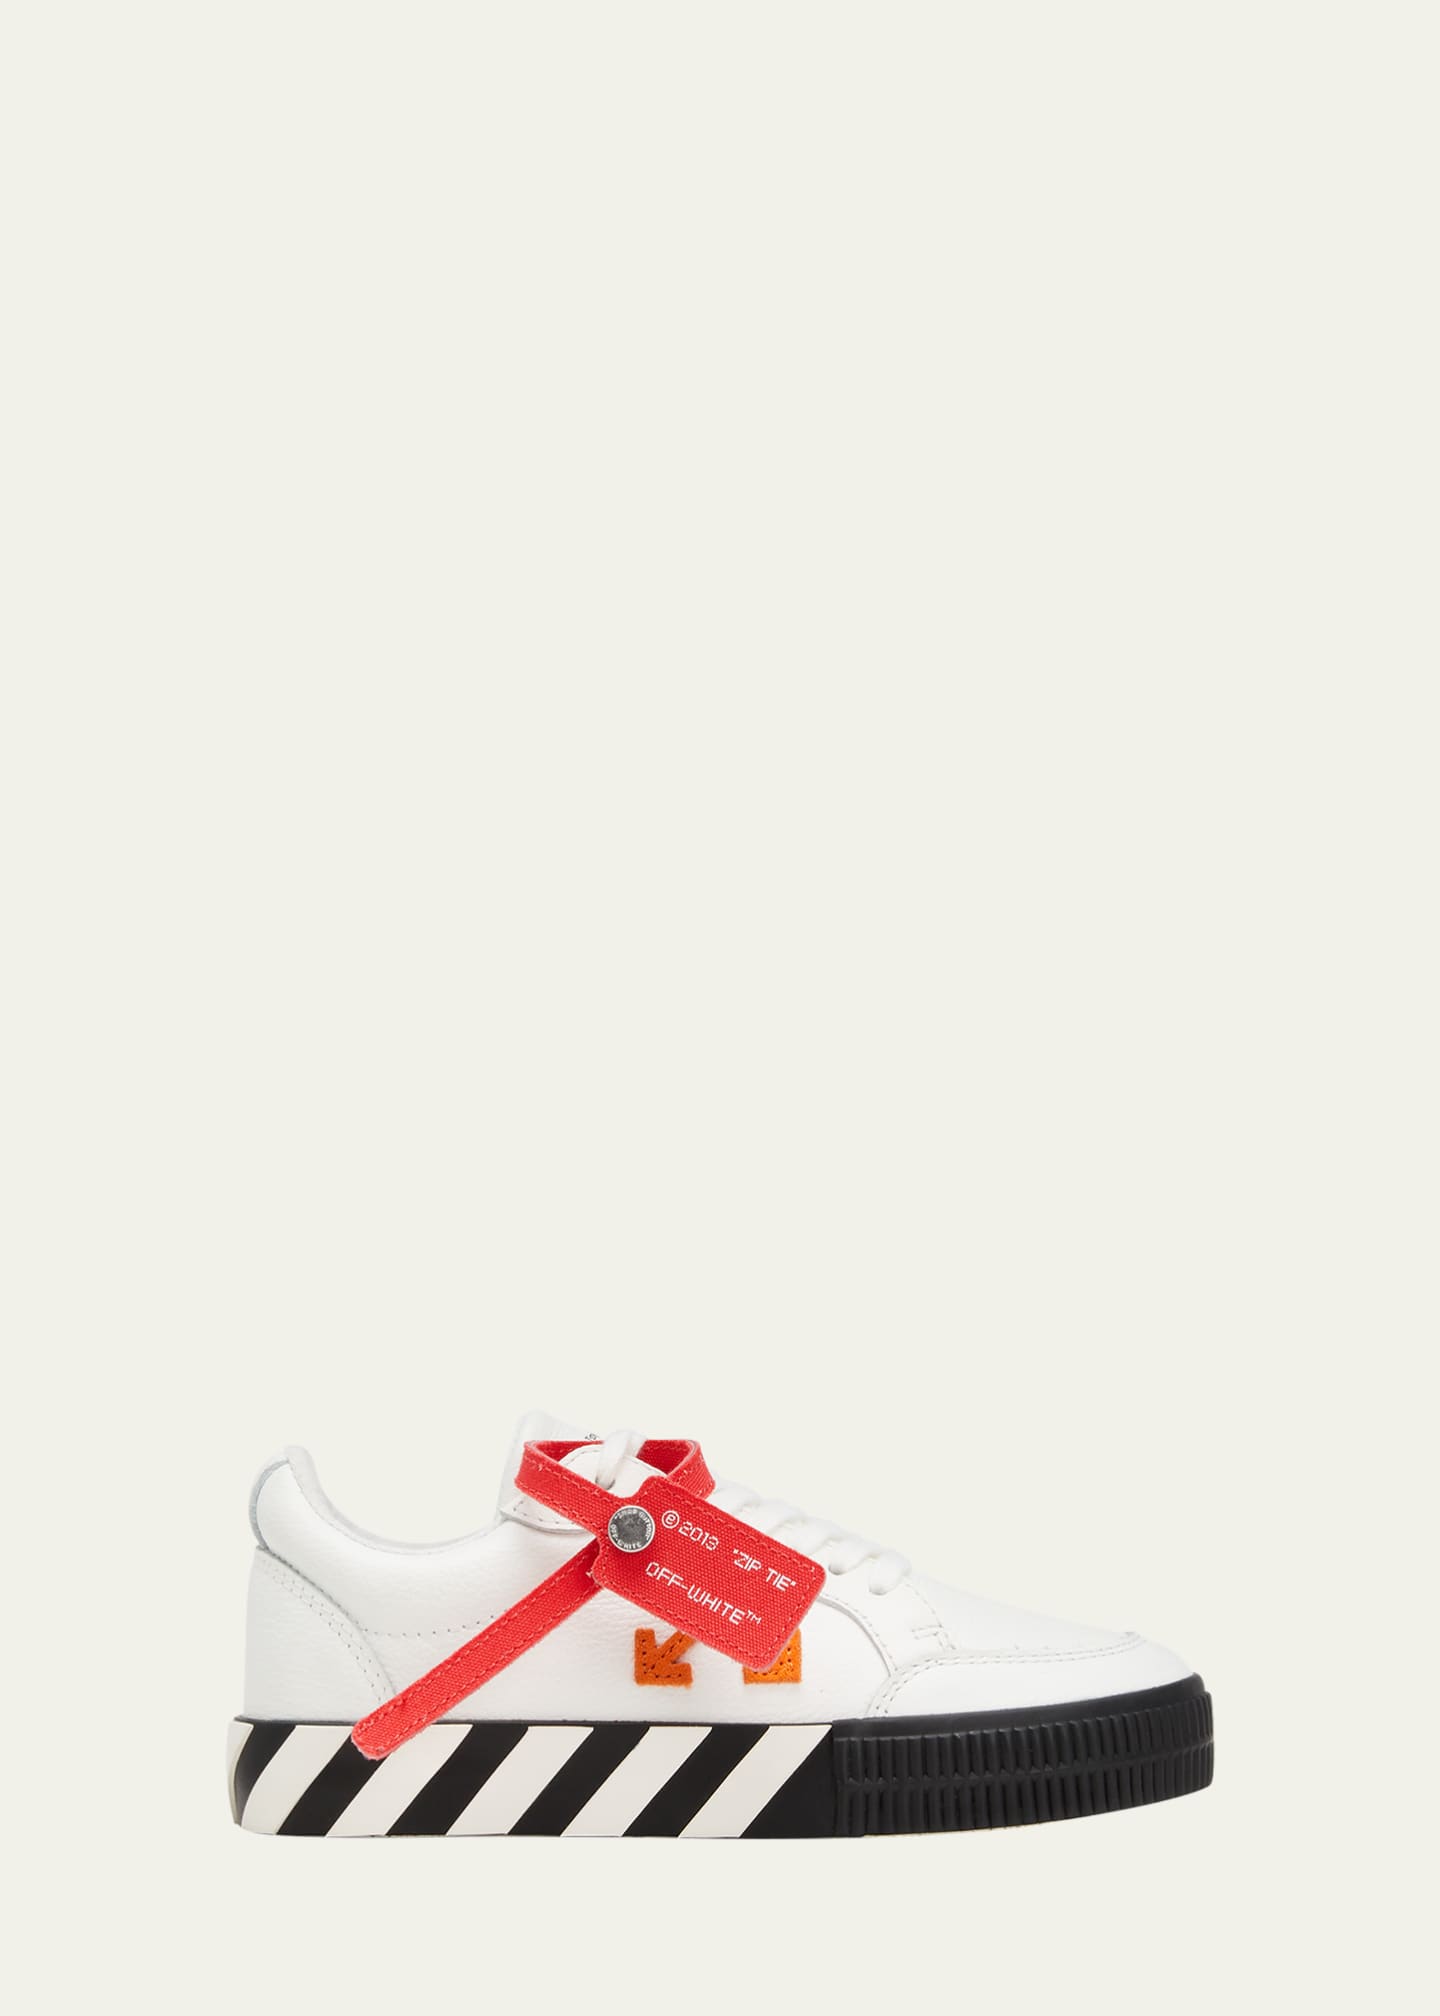 Off-White Kid's Arrow Leather Low-Top Sneakers, Size Toddlers/Kids ...